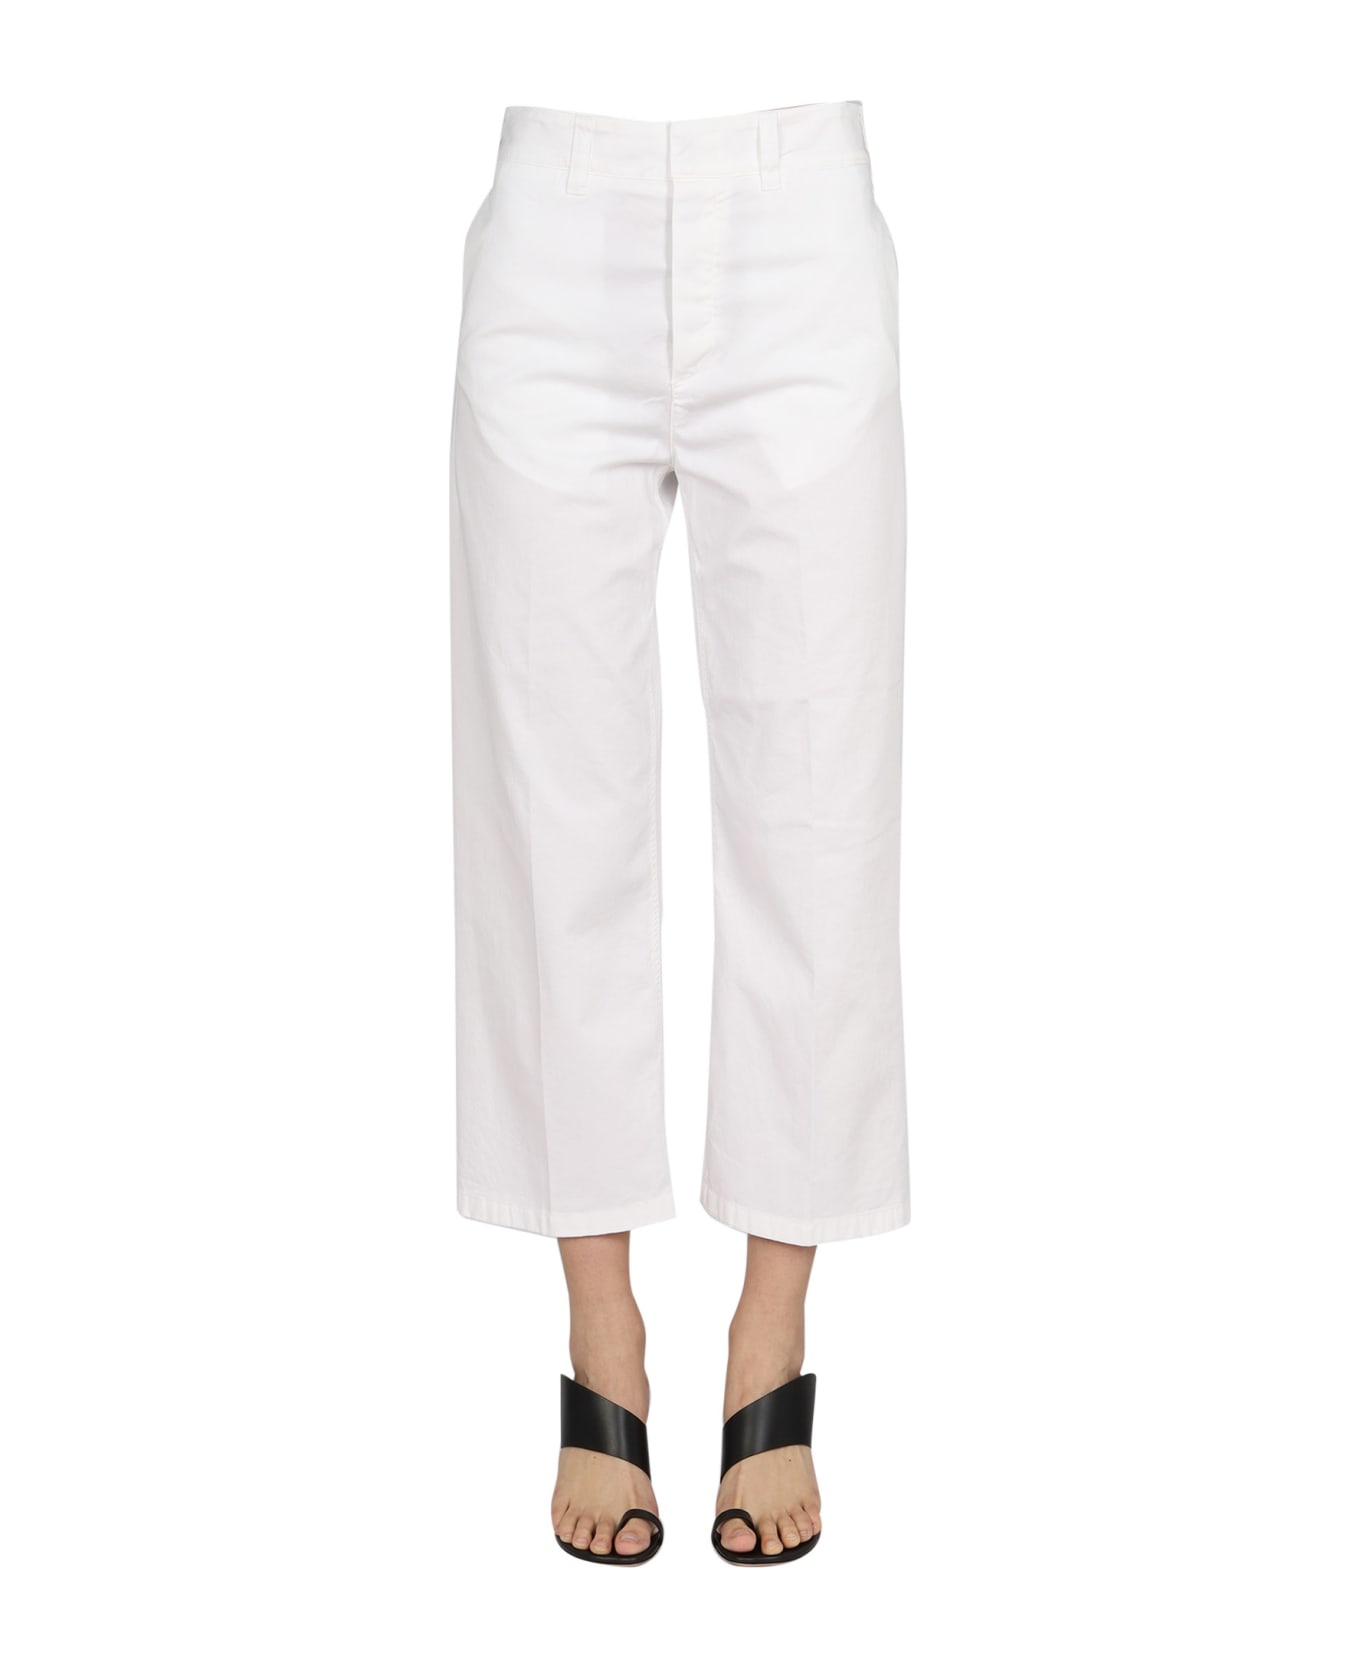 Department Five Cropped Fit Jeans - BIANCO